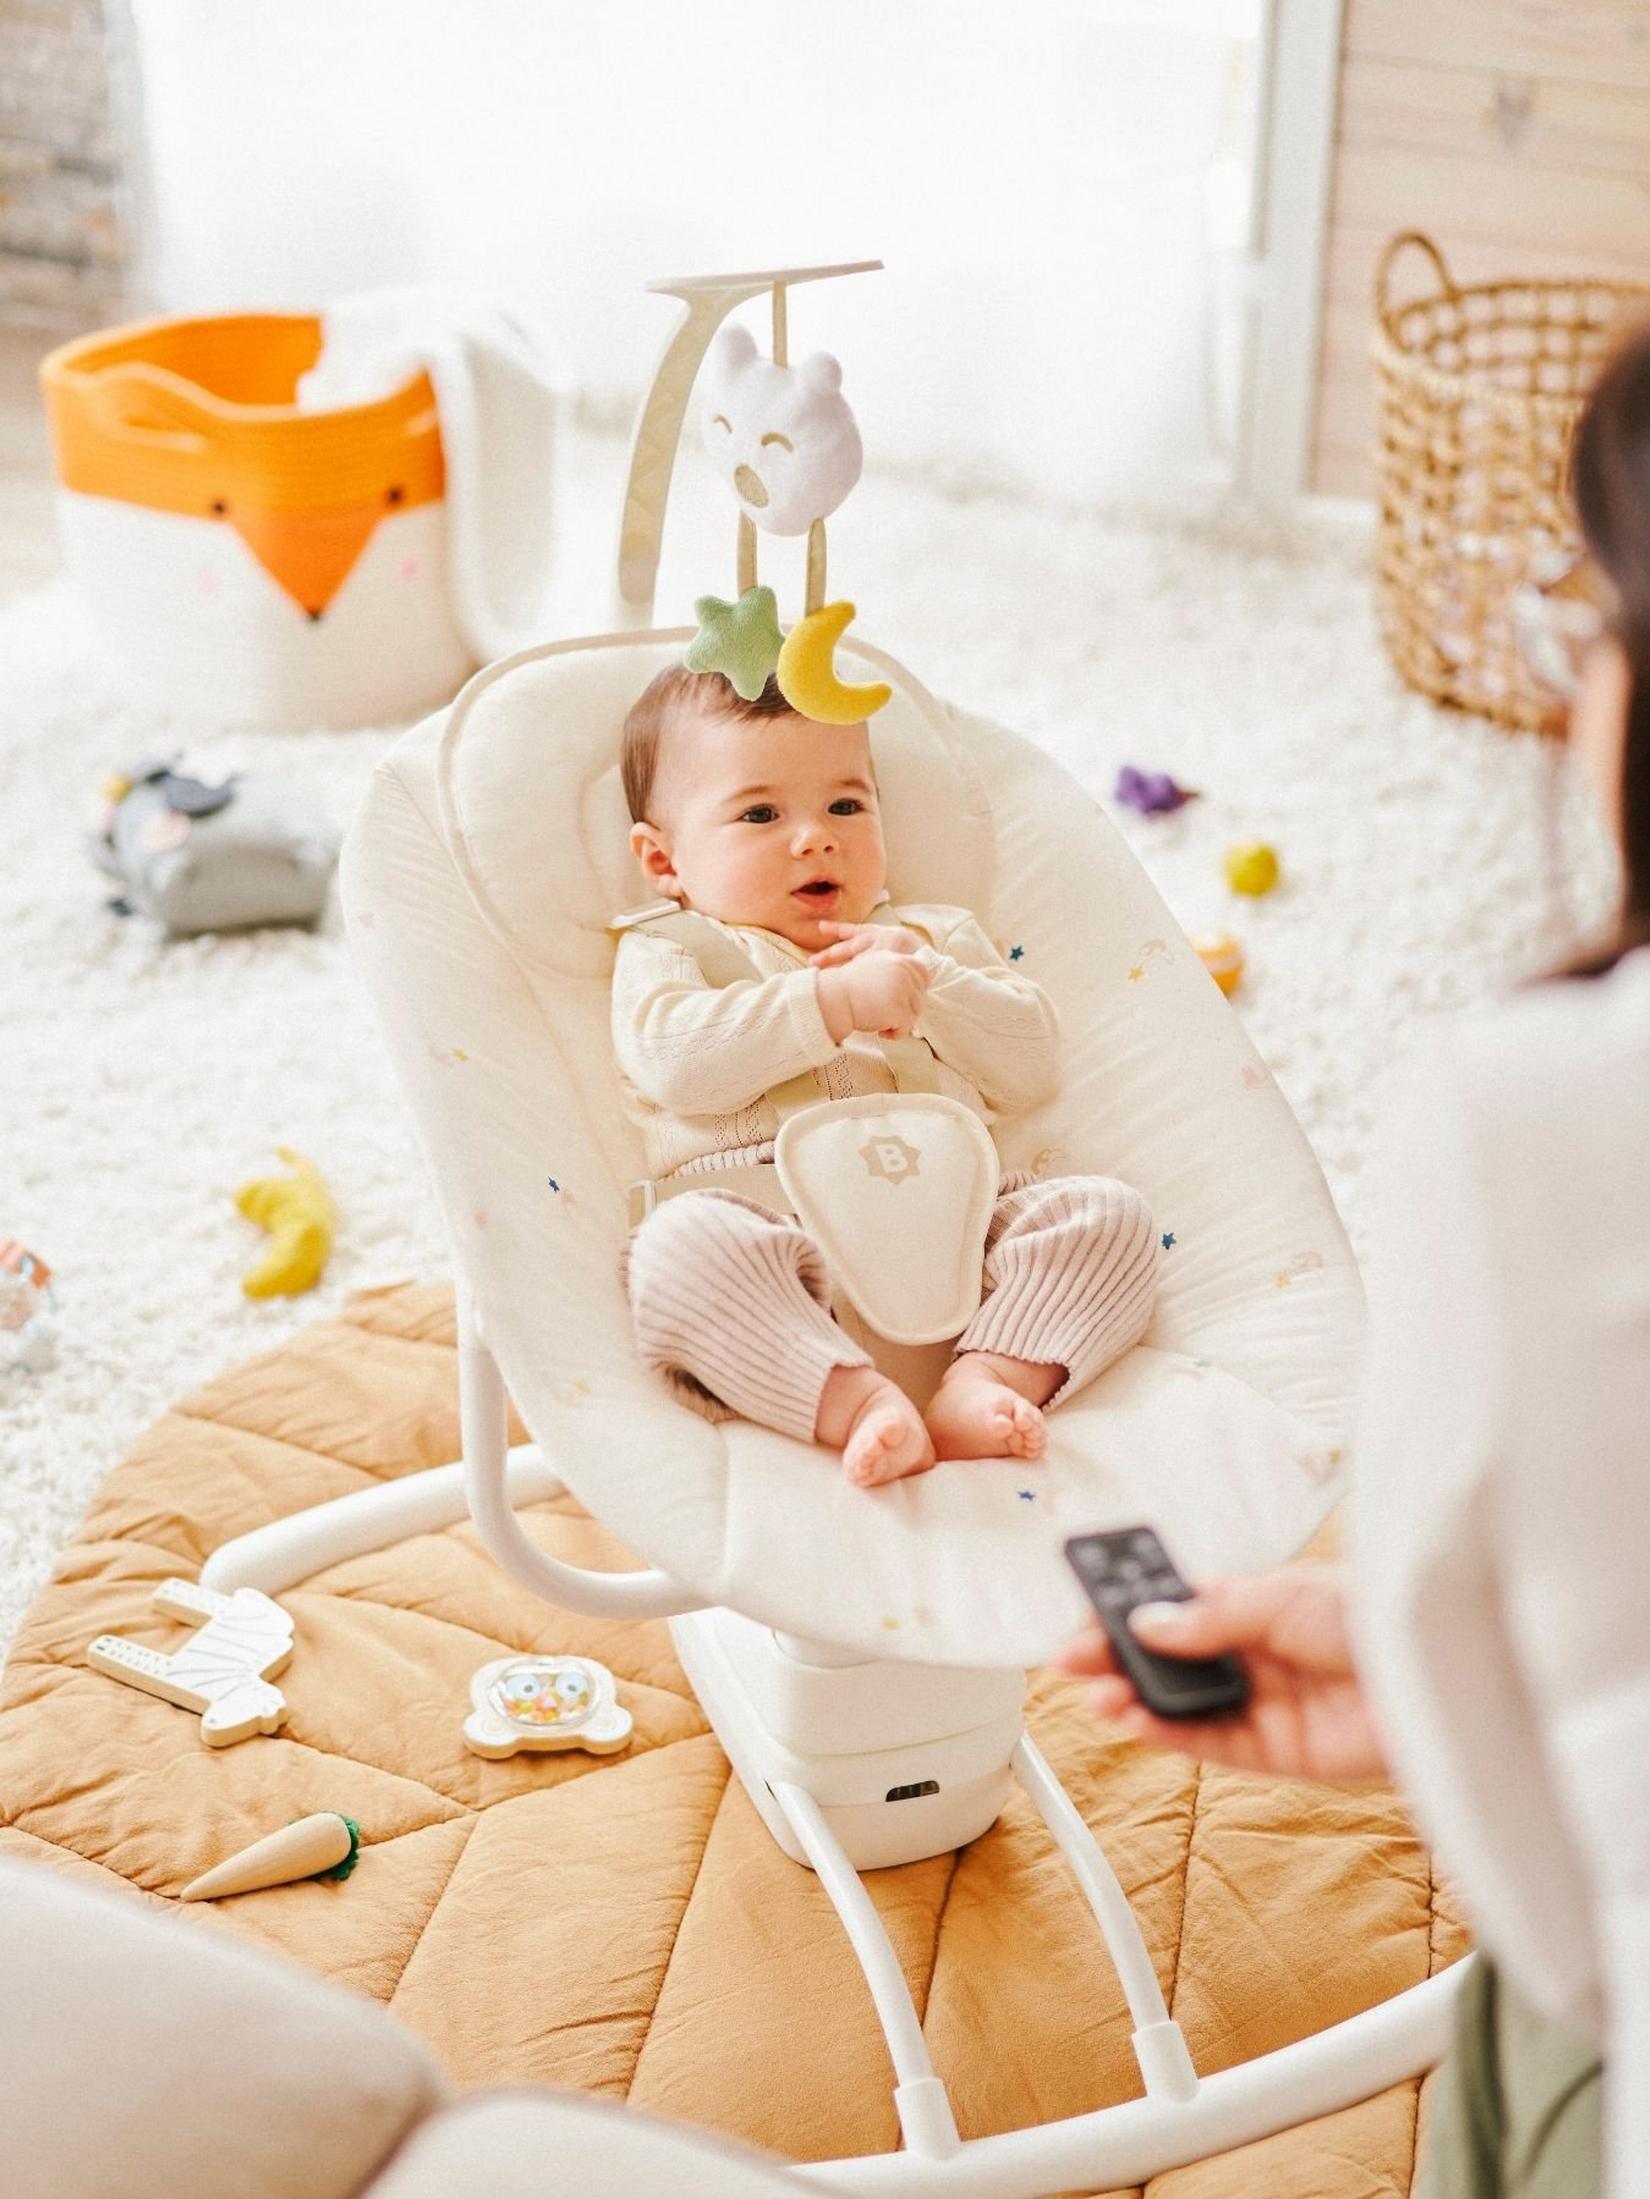 Badabulle Electric Baby Swing-Rocker with remote control - Mari Kali Stores Cyprus